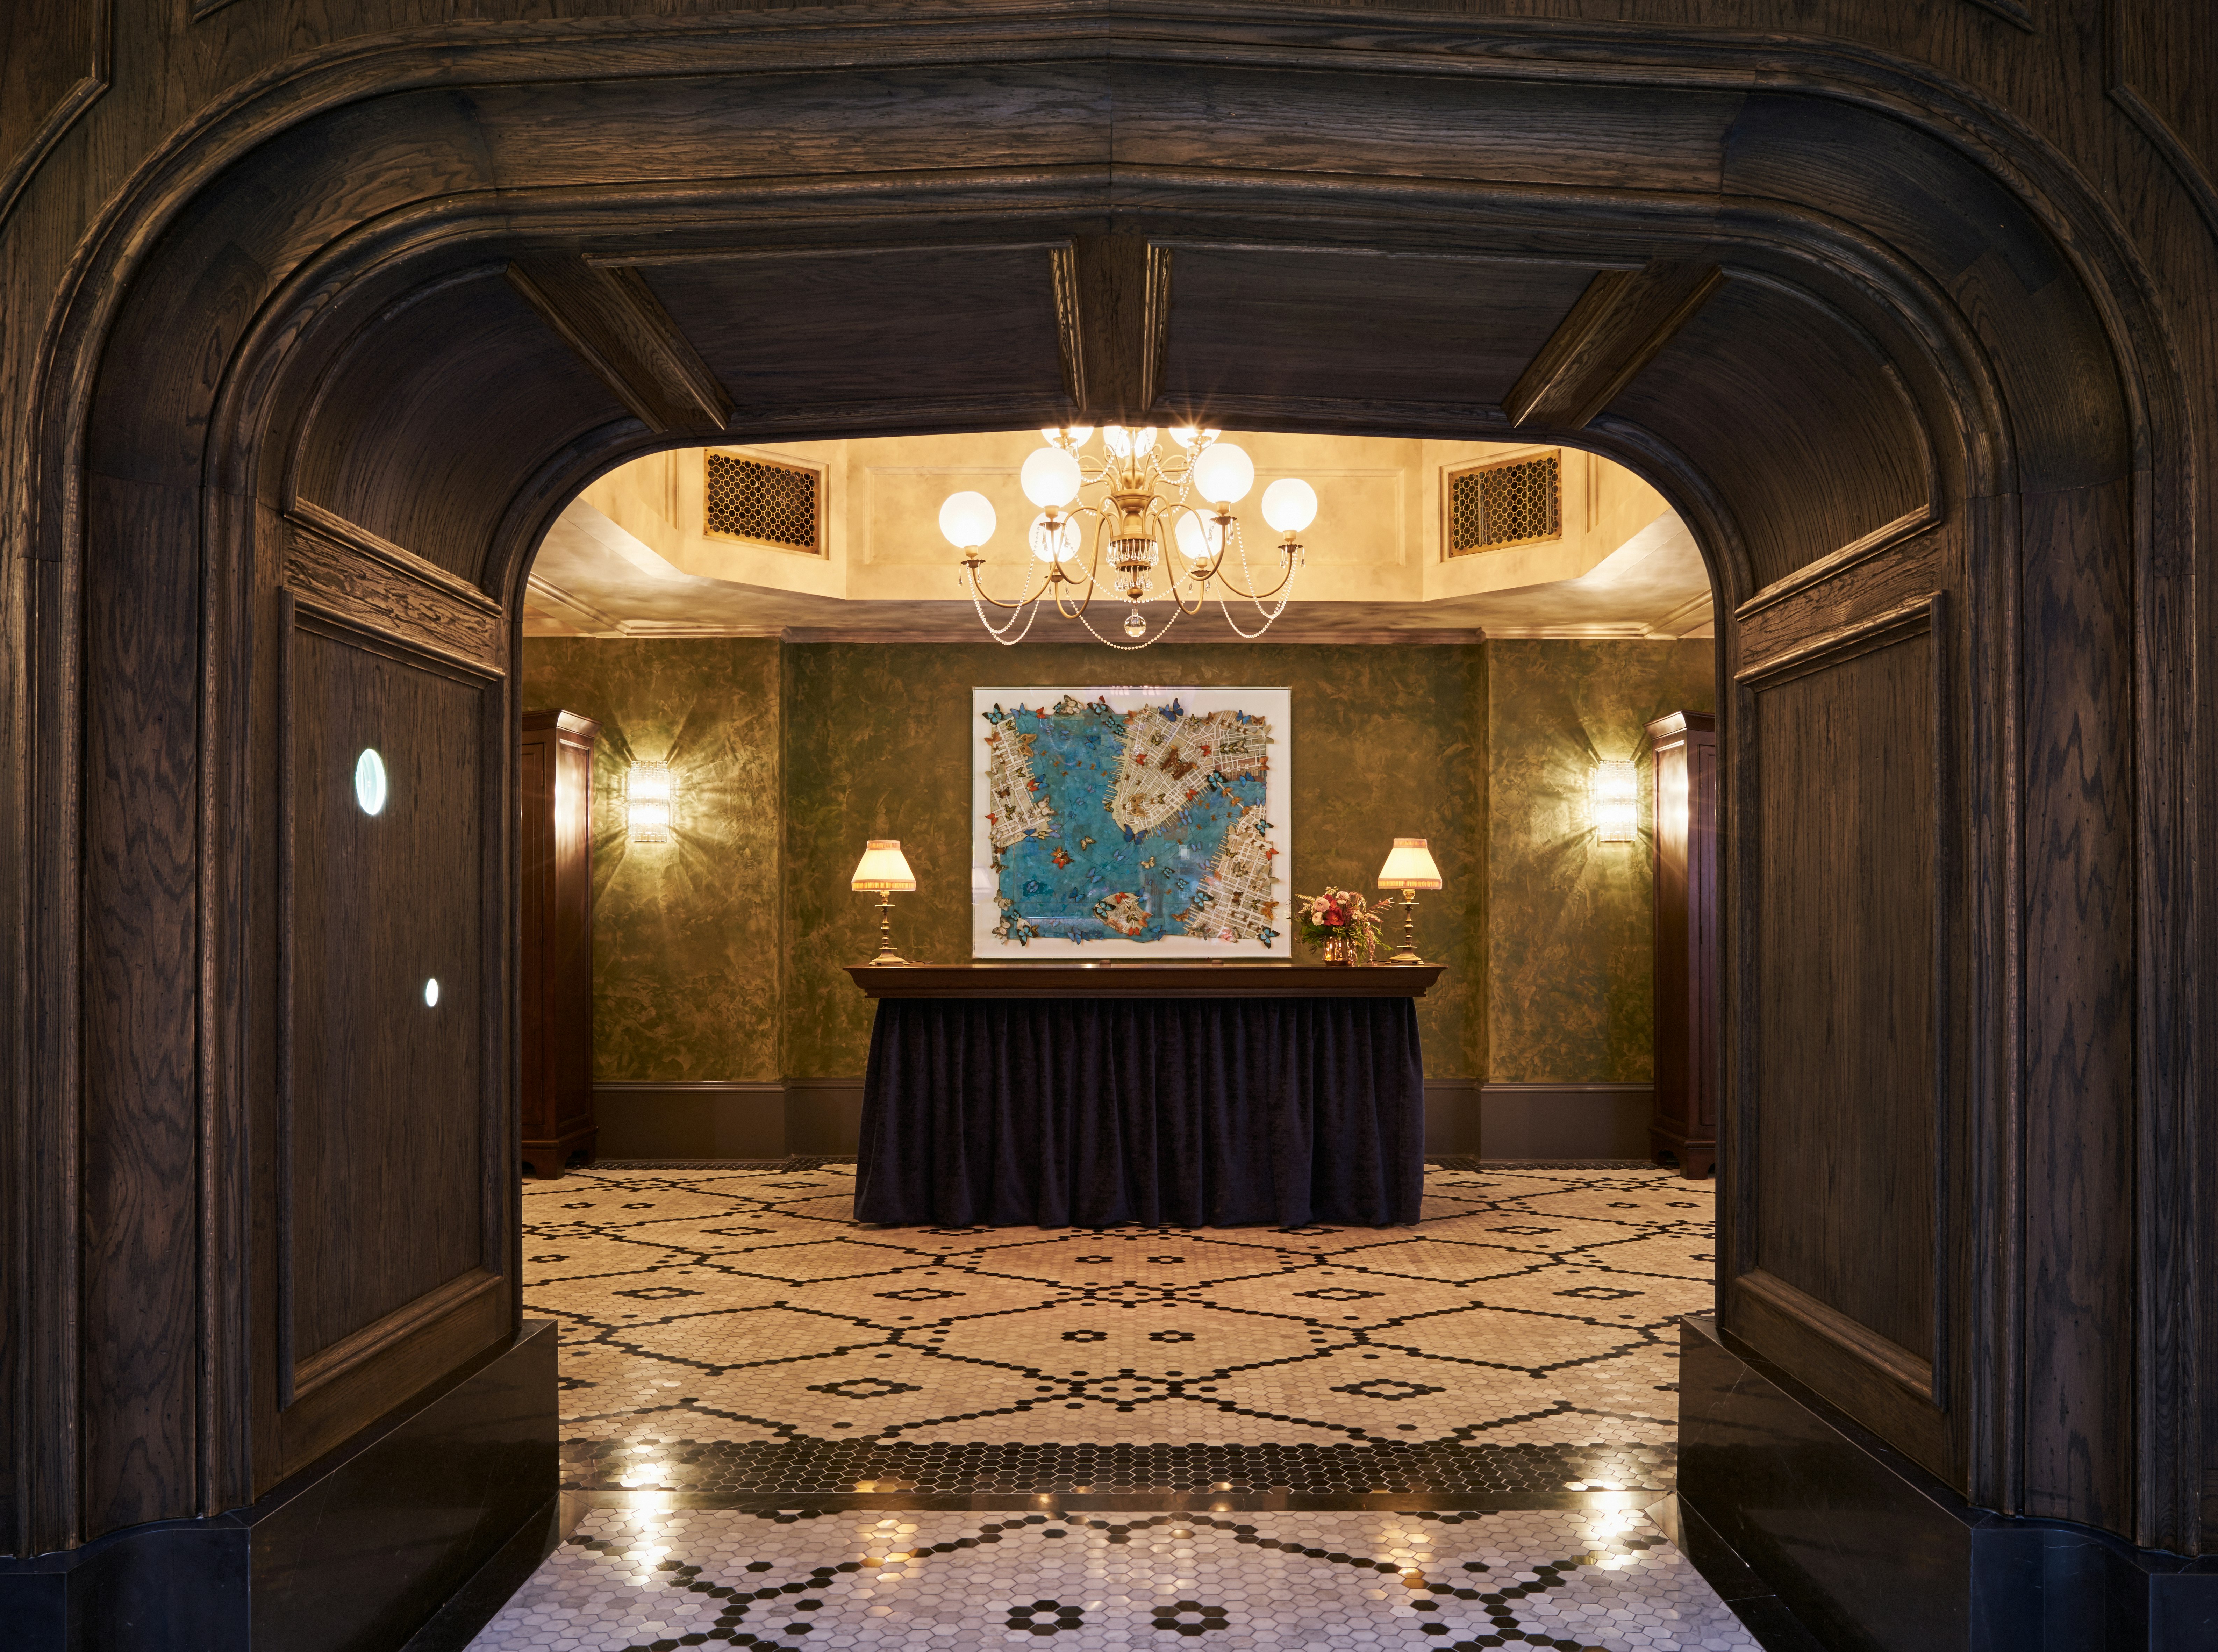  A grand, dark-wood archway leads to a room with an ornately tiled floor and a concierge desk under a chandelier at The Beekman. Jane Hammond’s 'All Souls (Buttermilk Channel)' (2015) is hanging on the wall behind the desk.